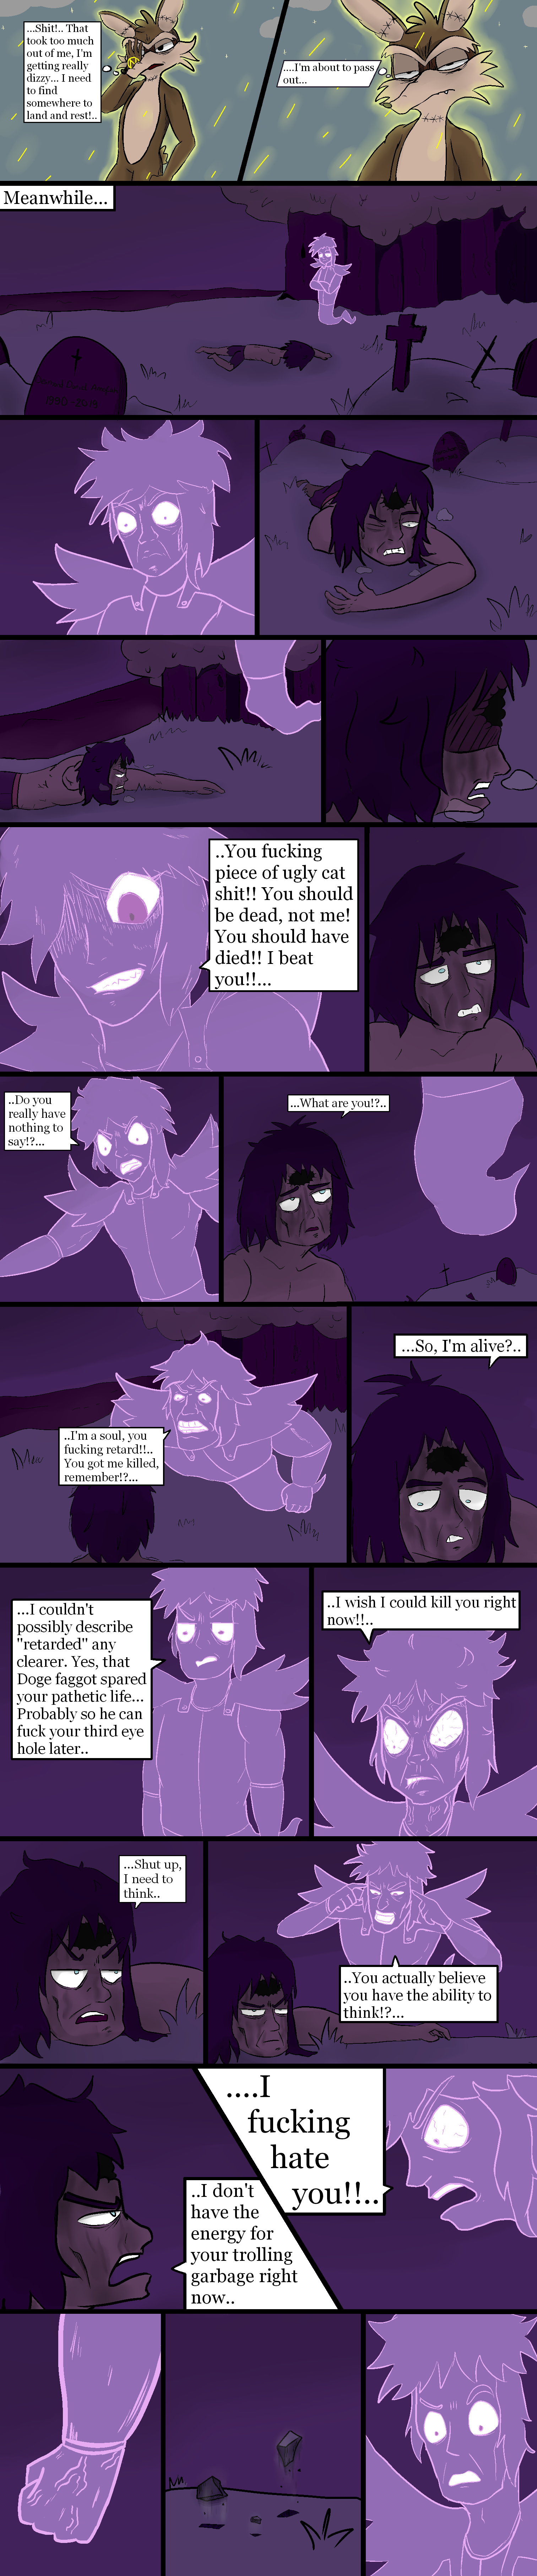 ch25/pg24.png. If you're seeing this, enable images. Or, perhaps we have a website issue. Try refreshing, if unsuccessful email c@commodorian.org with a detailed description of how you got here.